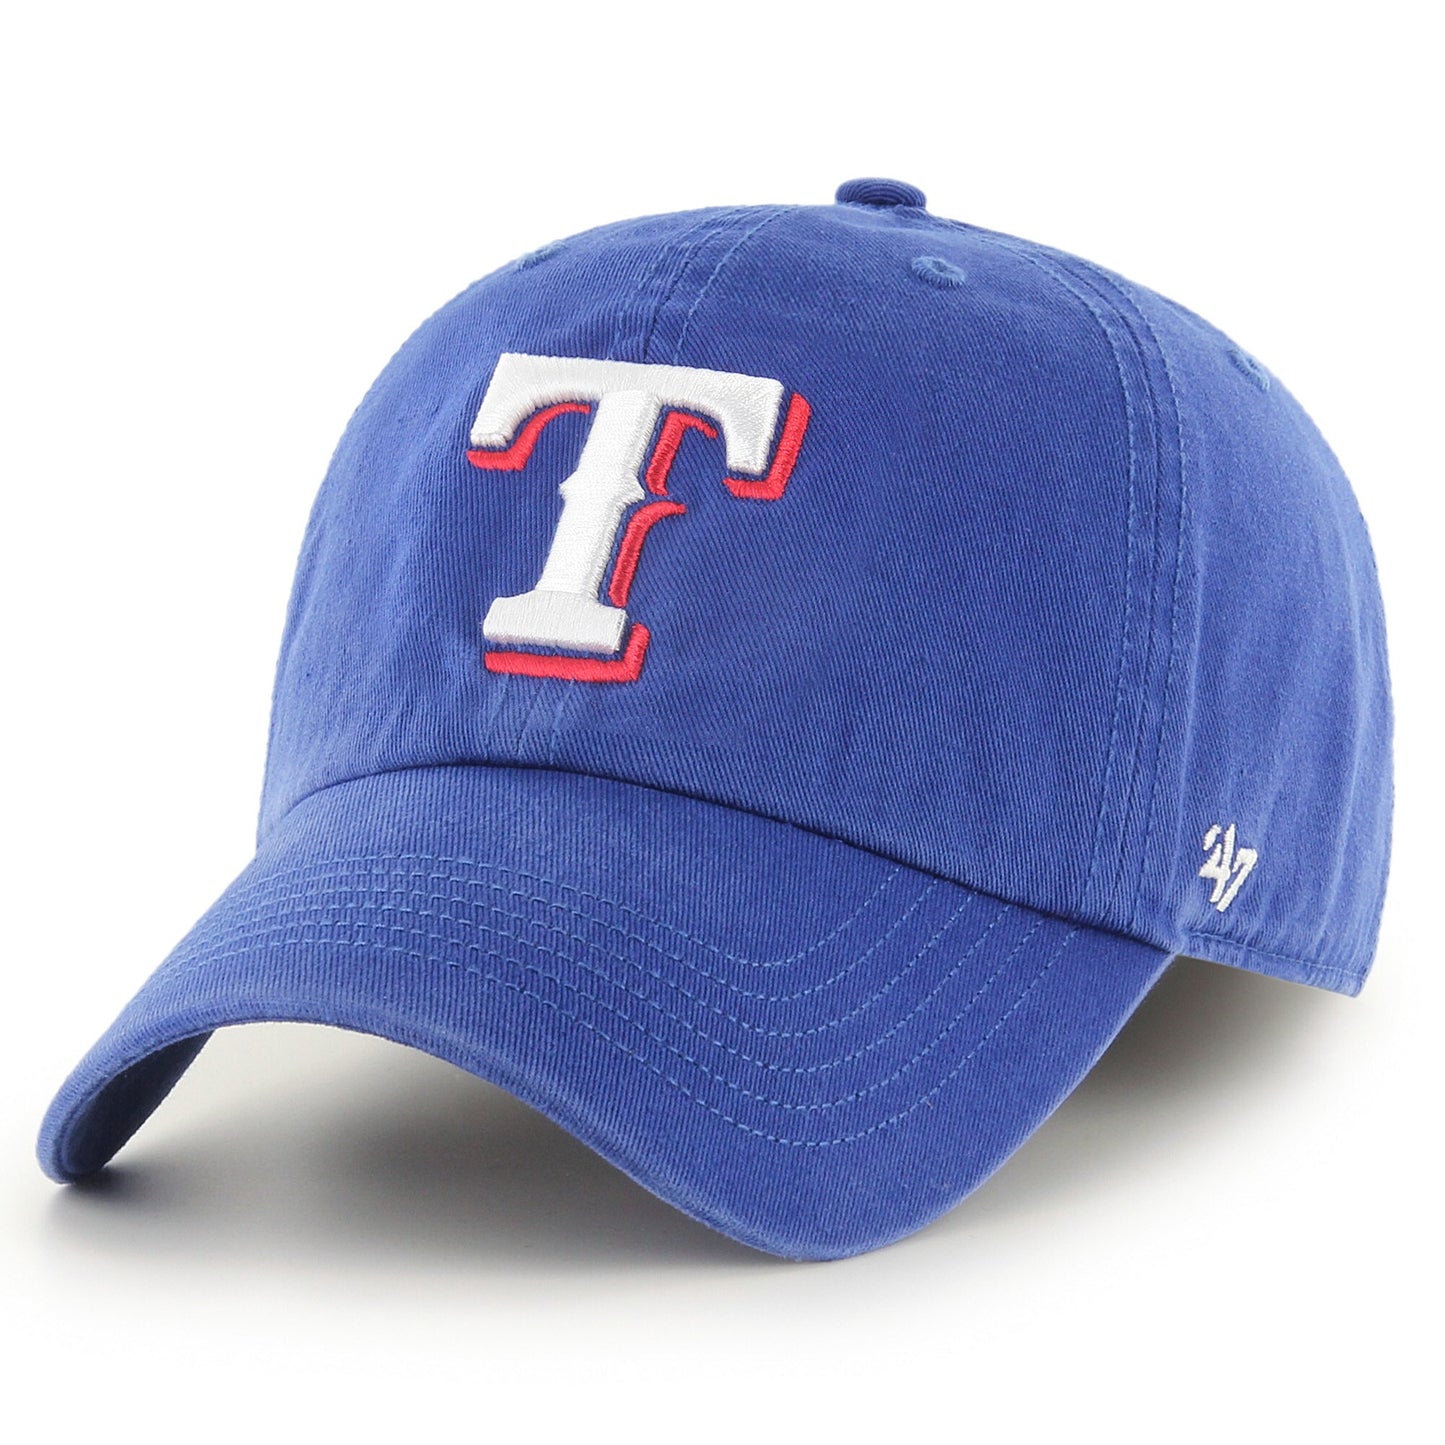 Texas Rangers '47 Franchise Logo Fitted Hat - Royal